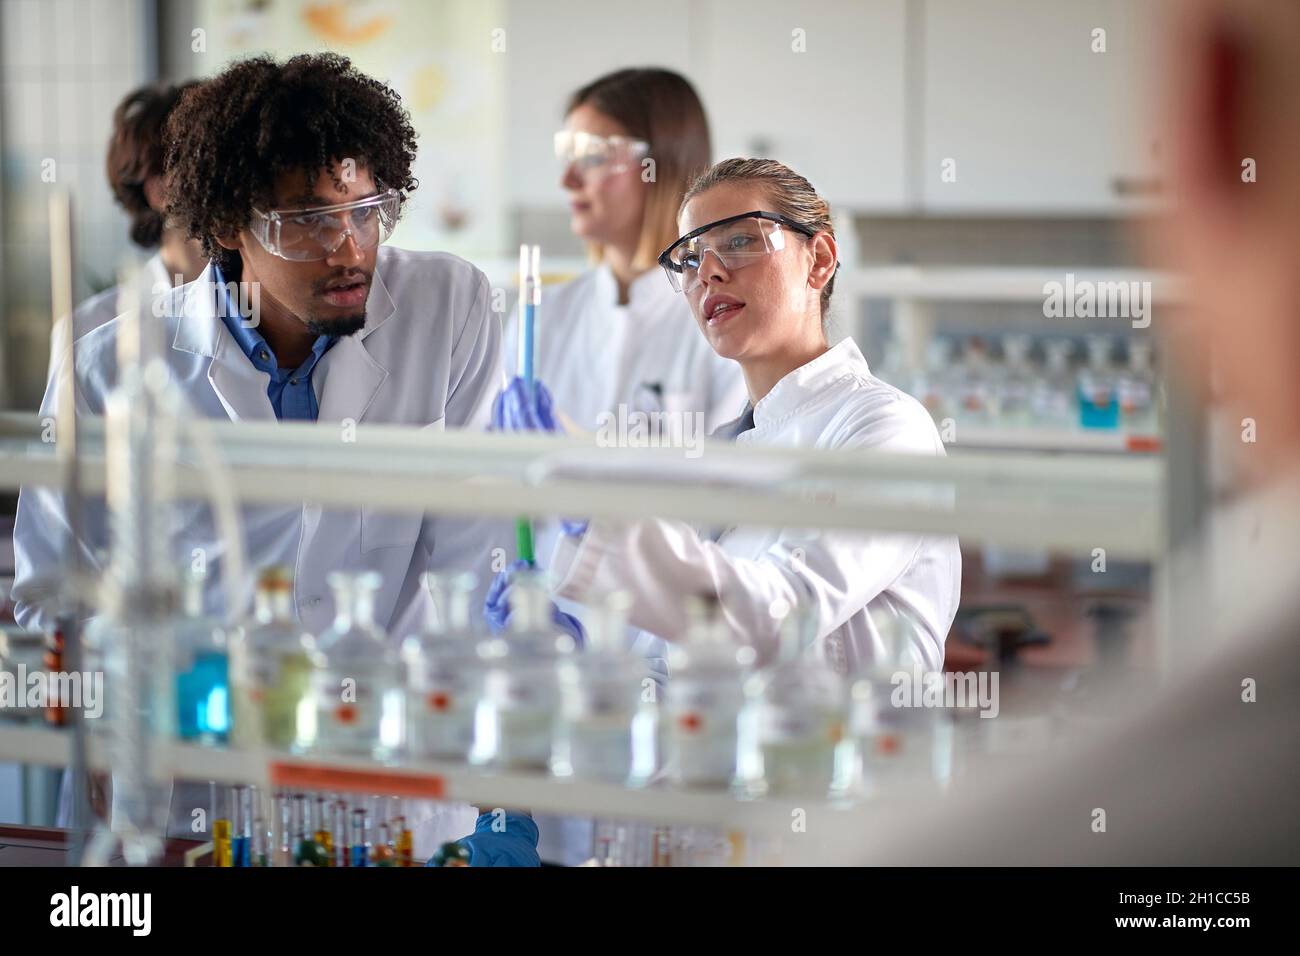 Workers in lab analyze test tube with samples on Corona Stock Photo